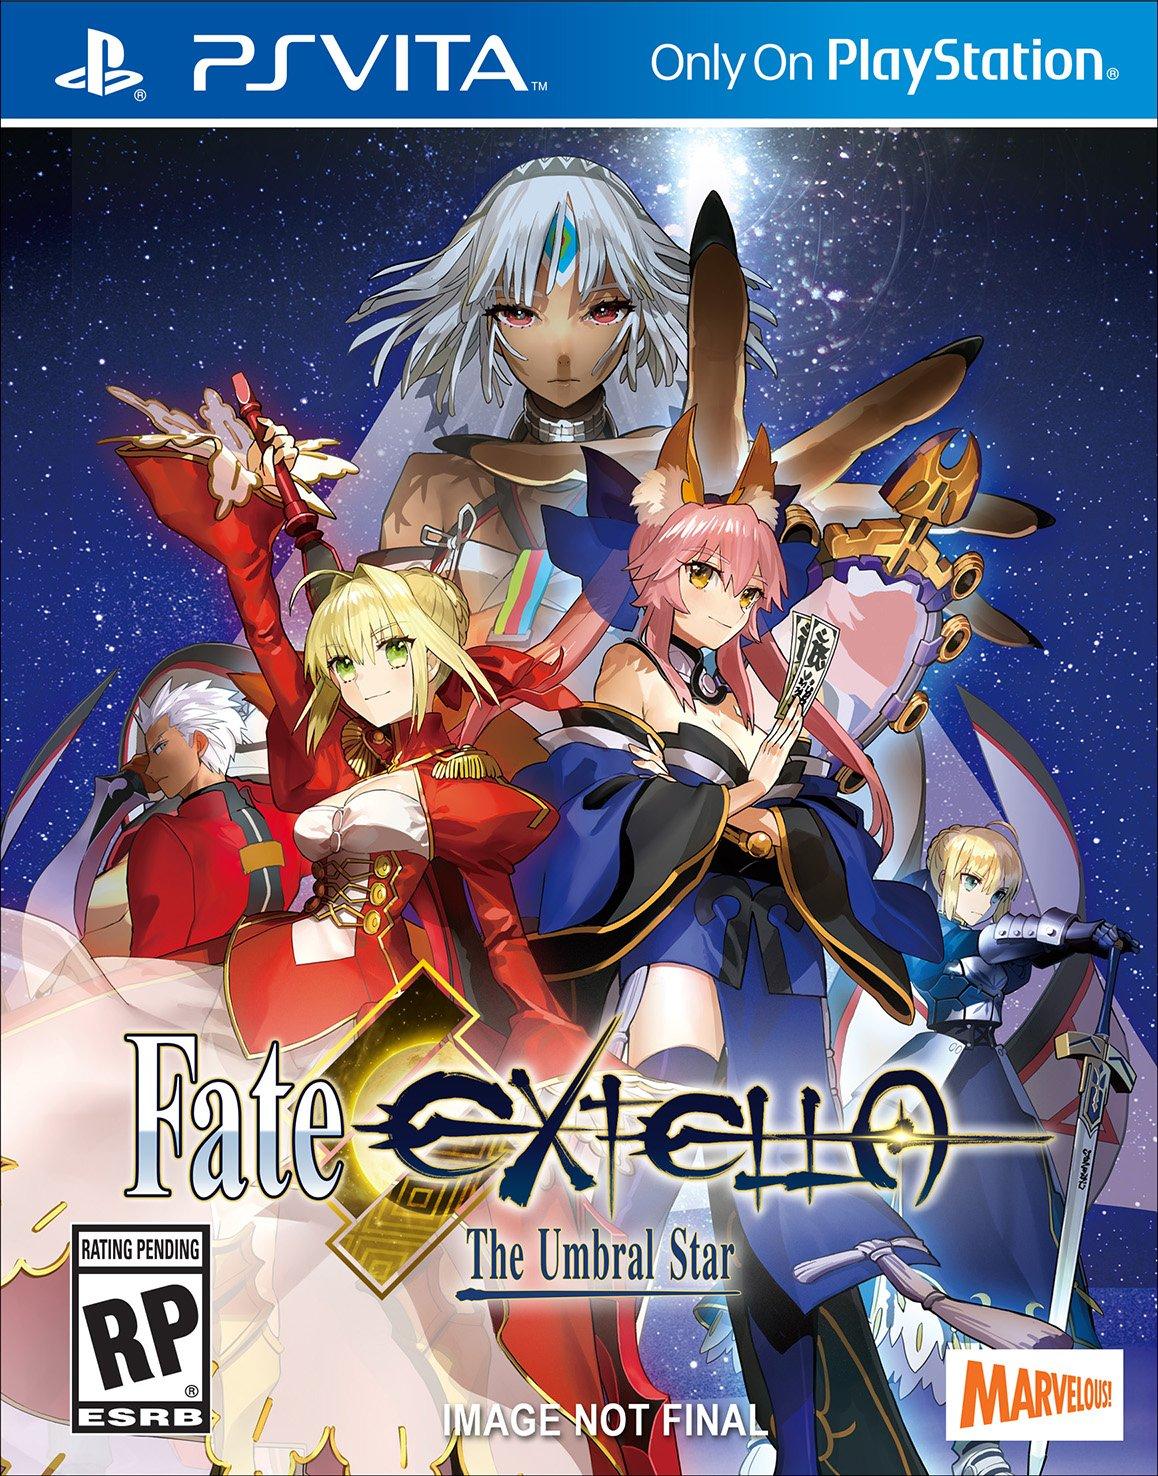 Fate/EXTELLA: The Umbral Star - PlayStation 4 | XSEED Games | GameStop